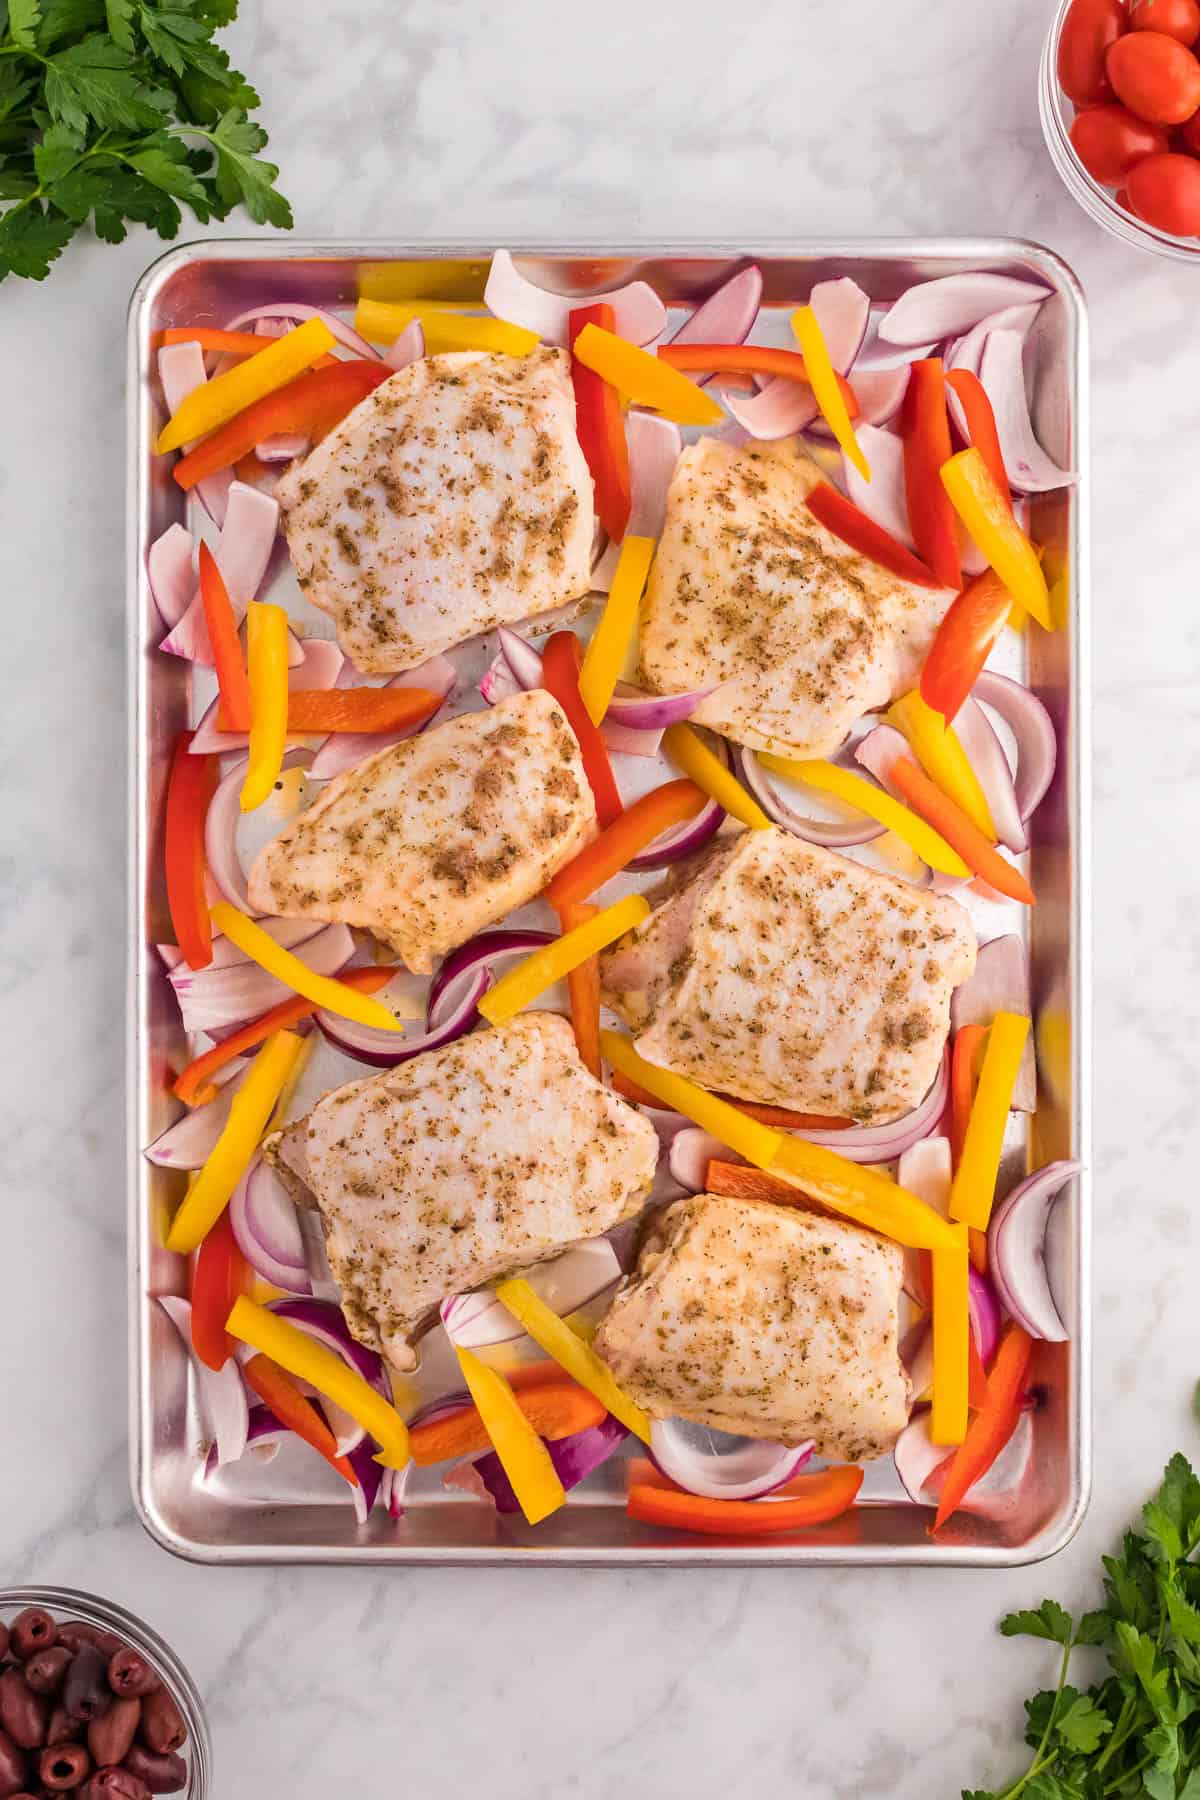 Place the sliced red onion, red bell pepper, and yellow bell pepper around the chicken on the sheet pan.